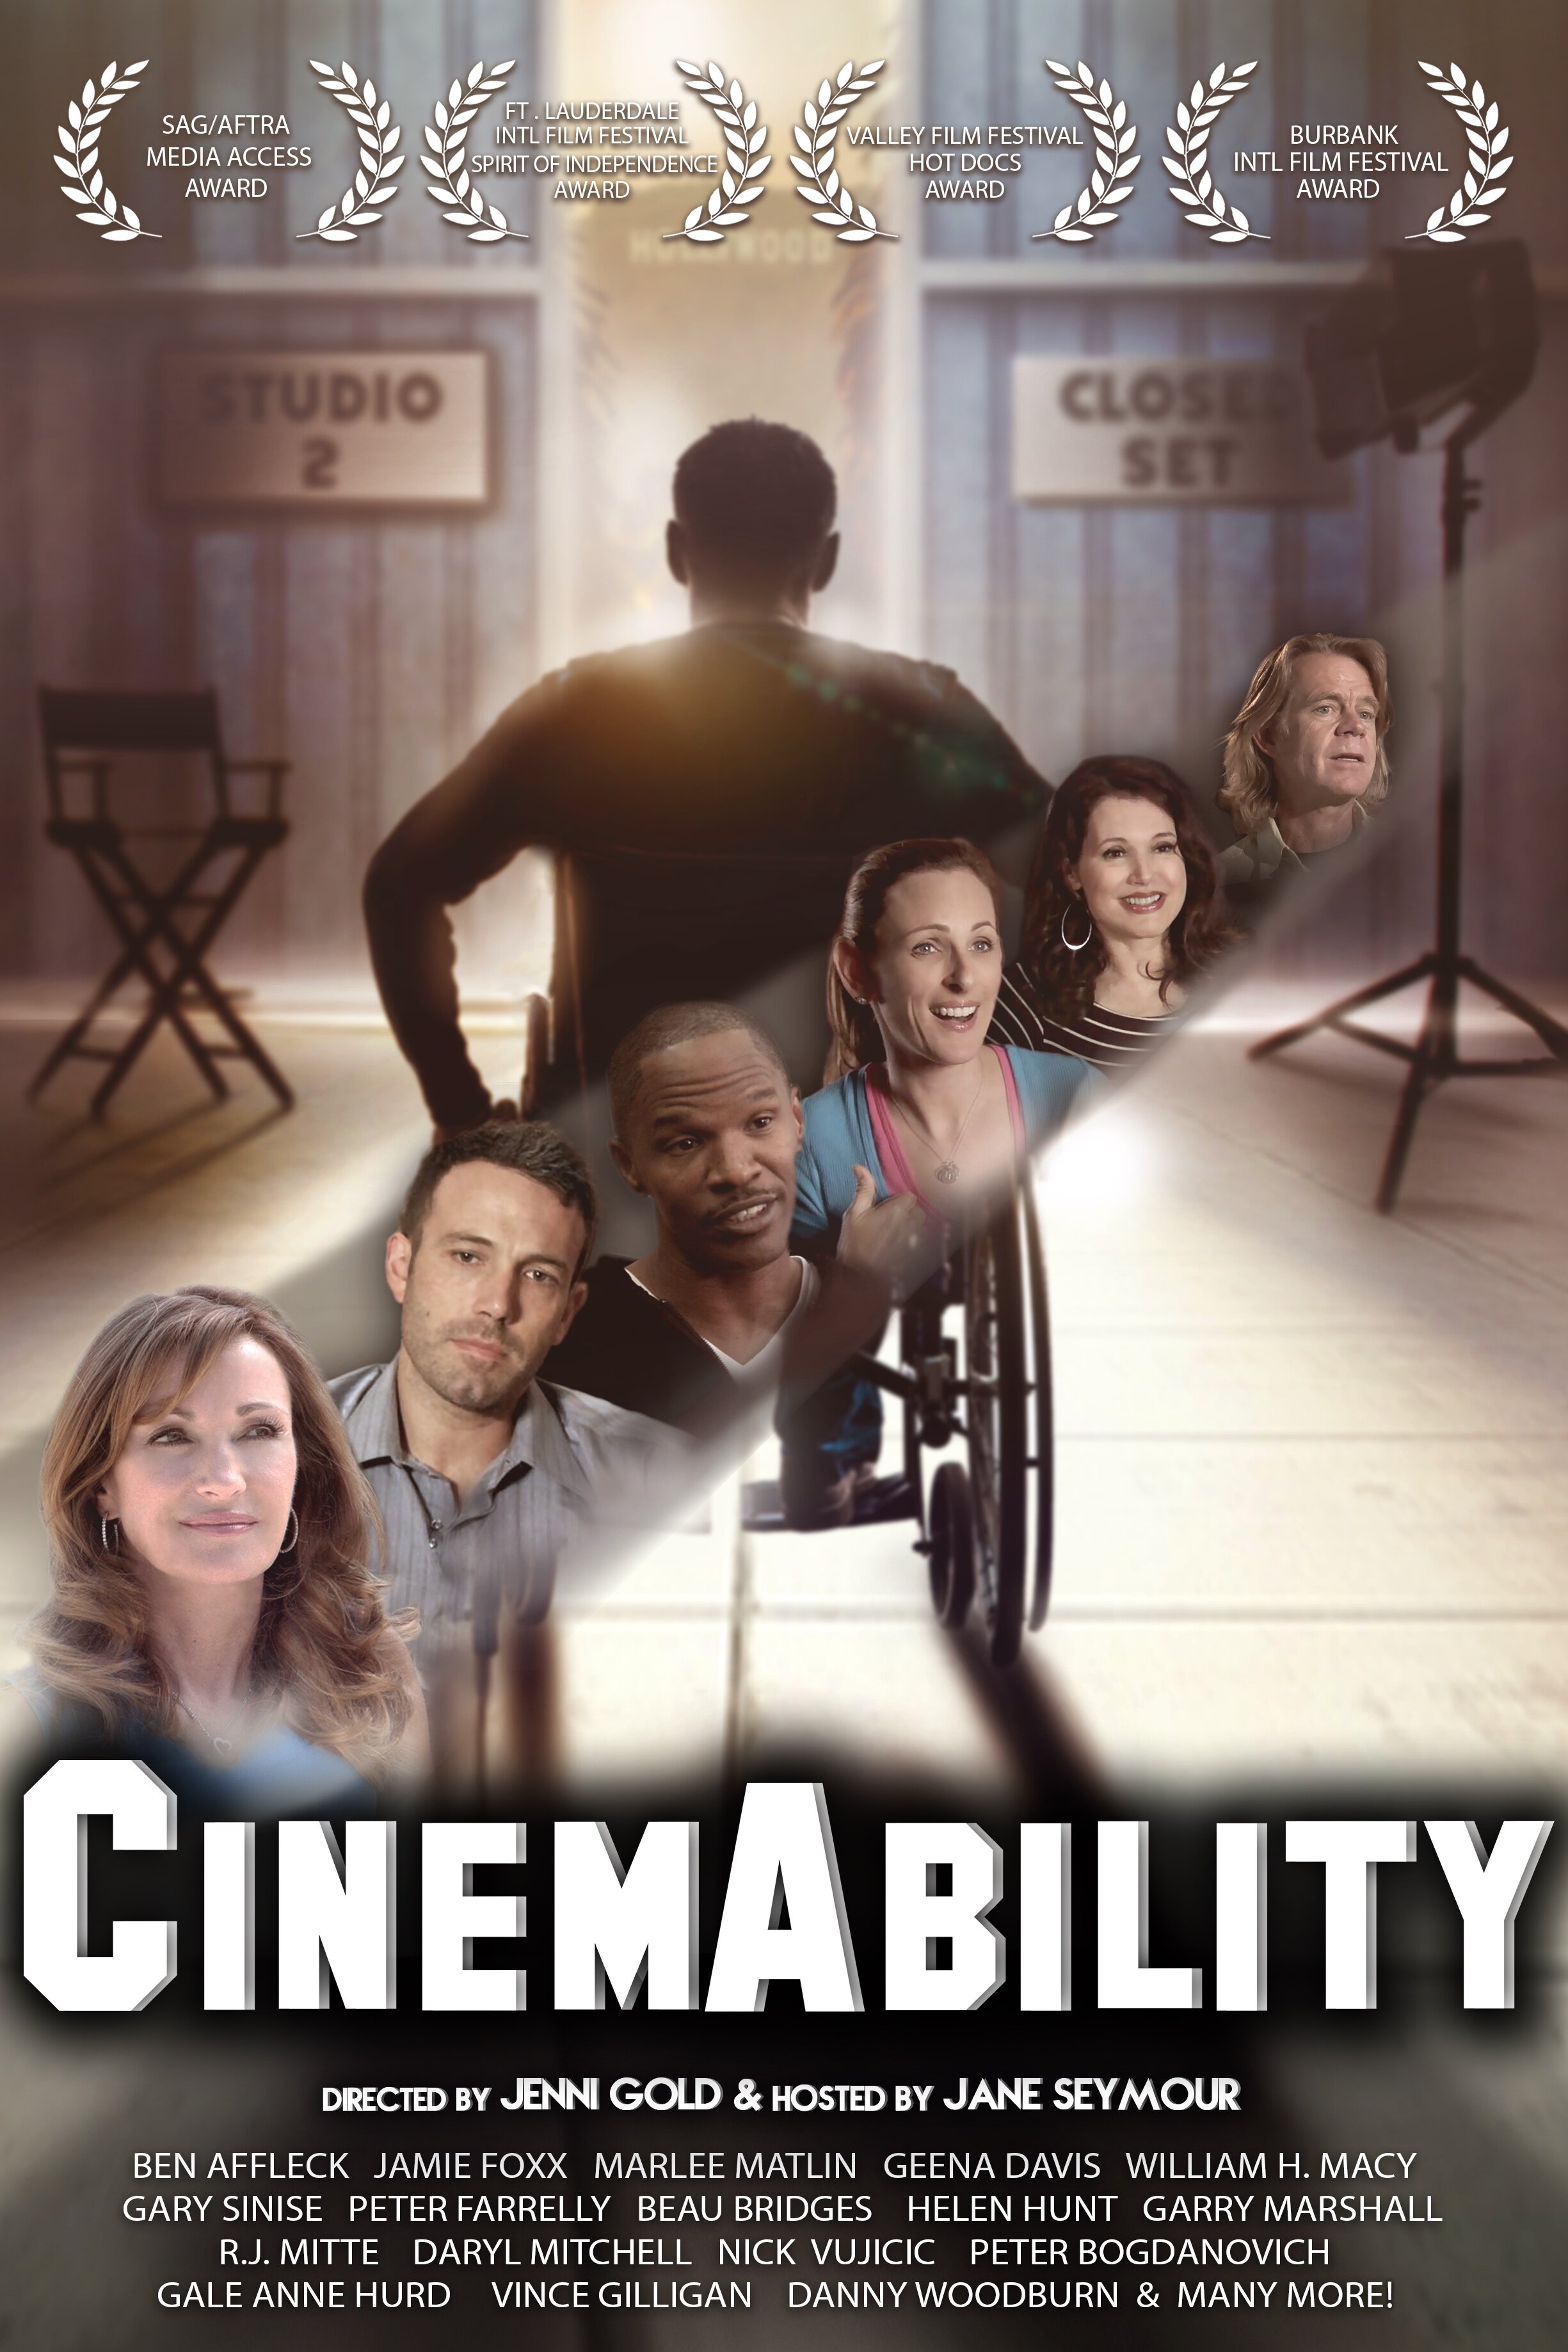 CinemAbility: The Art of Inclusion